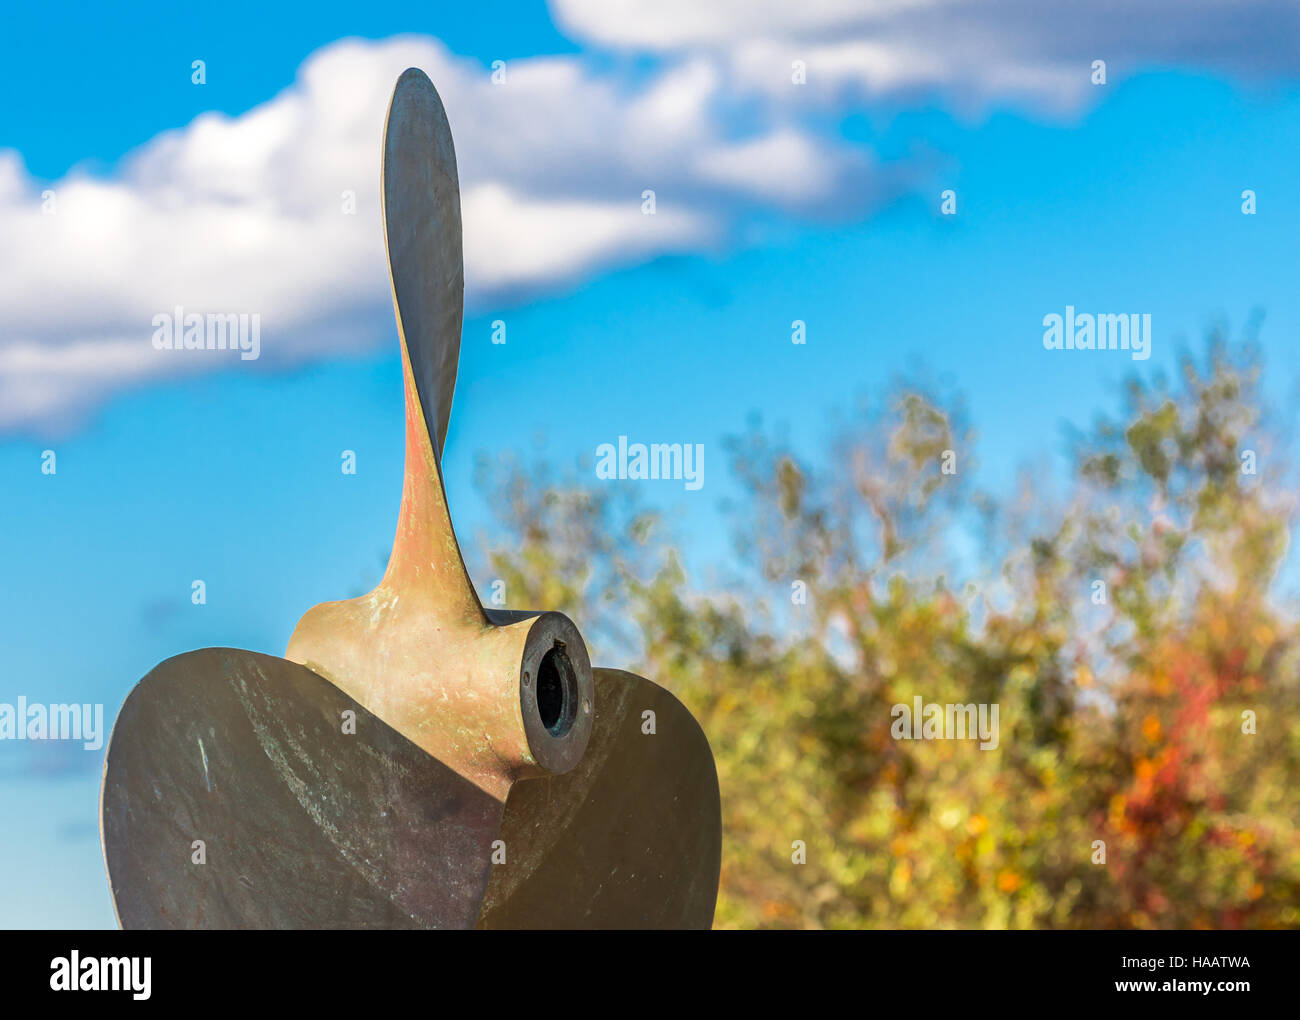 huge boat propeller with sky and trees in the background Stock Photo